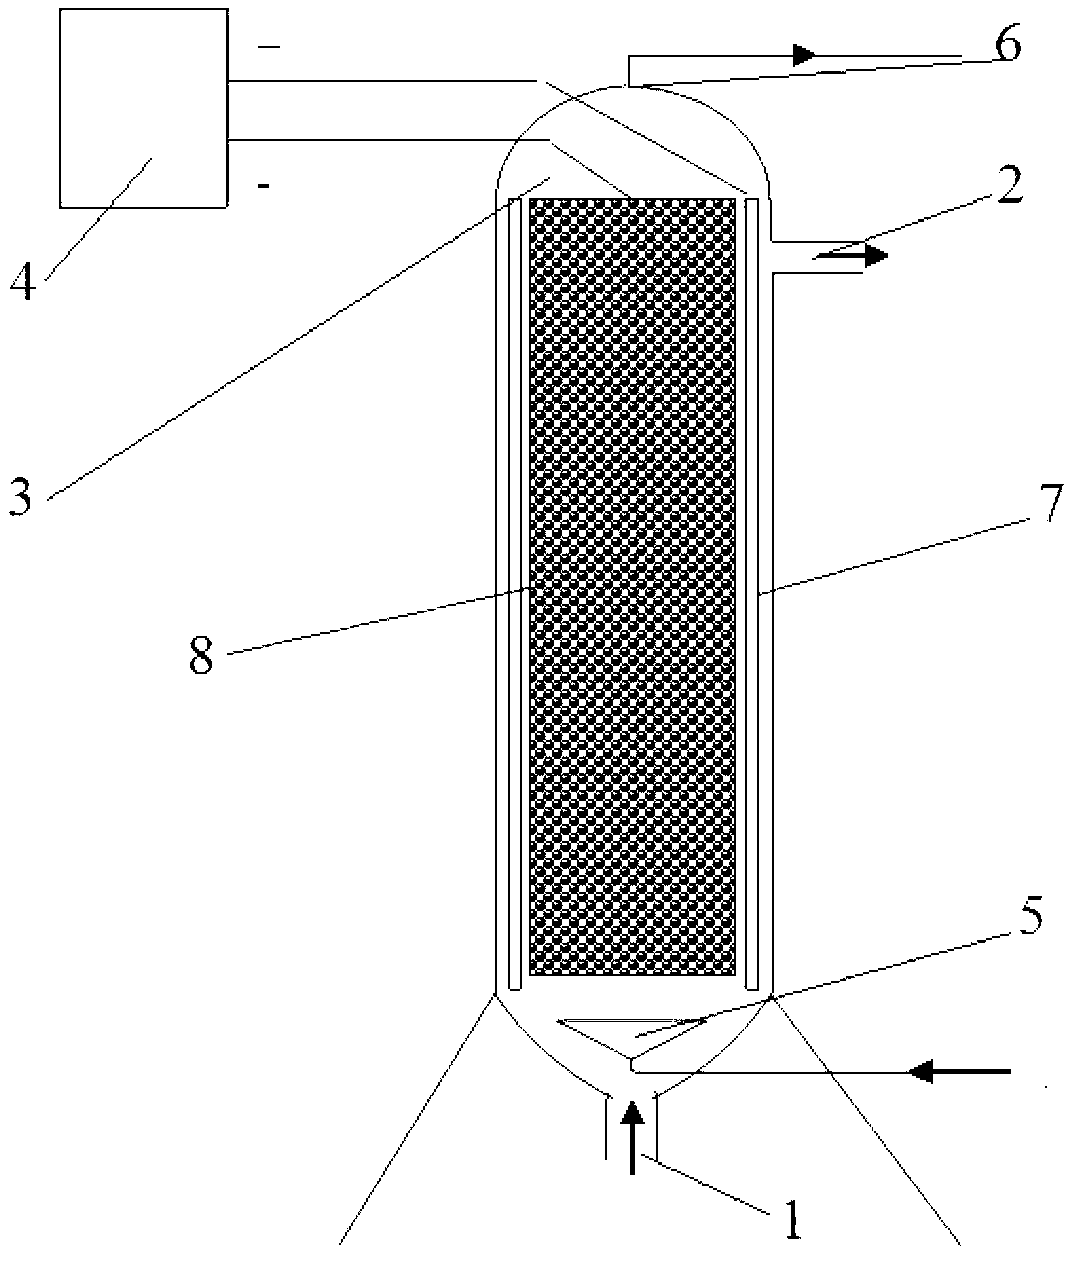 Method for removing organic pollutants in water through electrochemical cathode catalytic ozonation